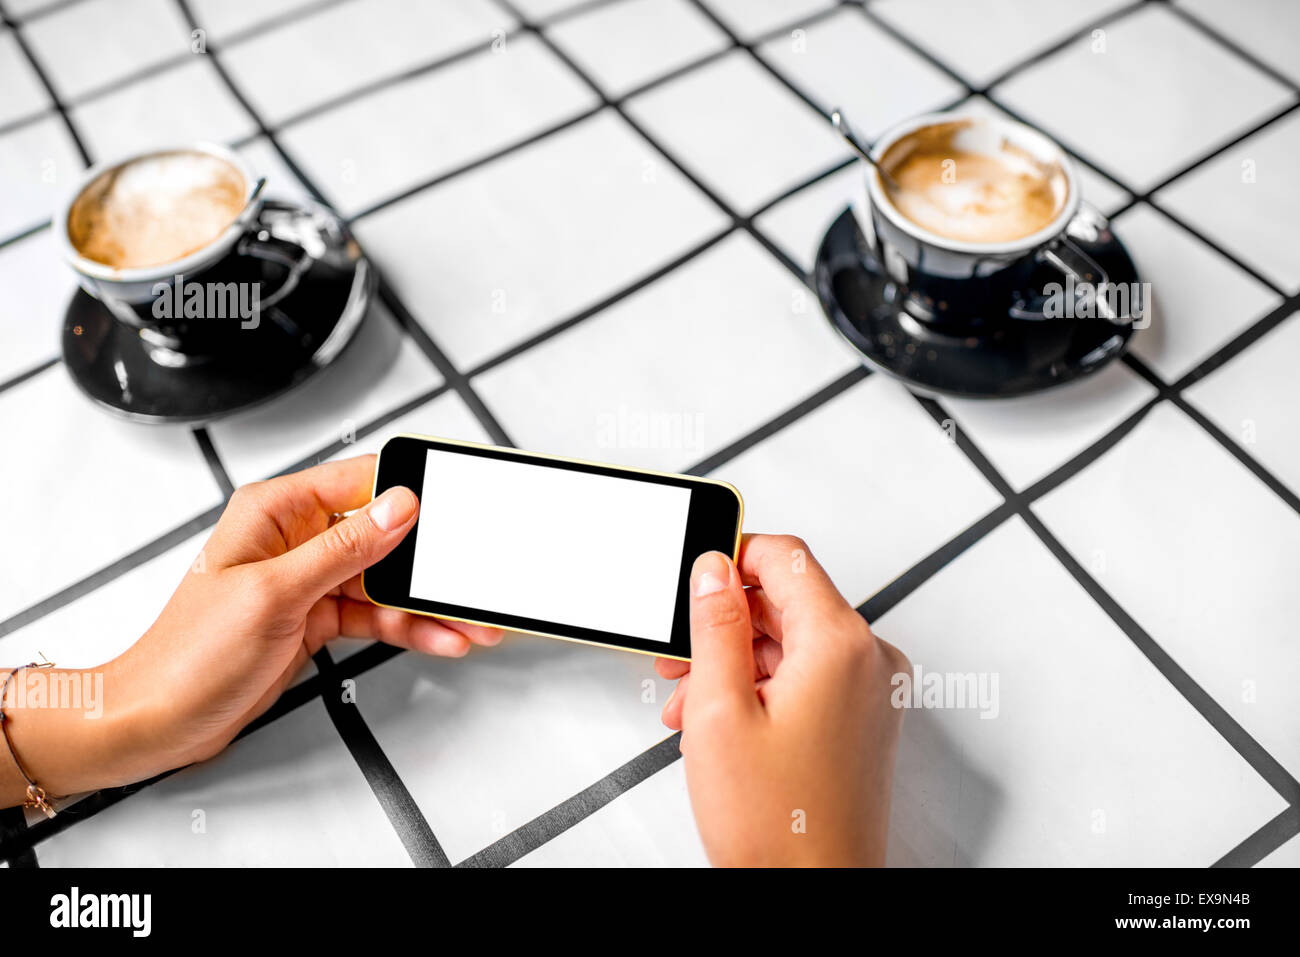 Female hand using a phone with isolated screen on checkered table with coffee cup. Stock Photo